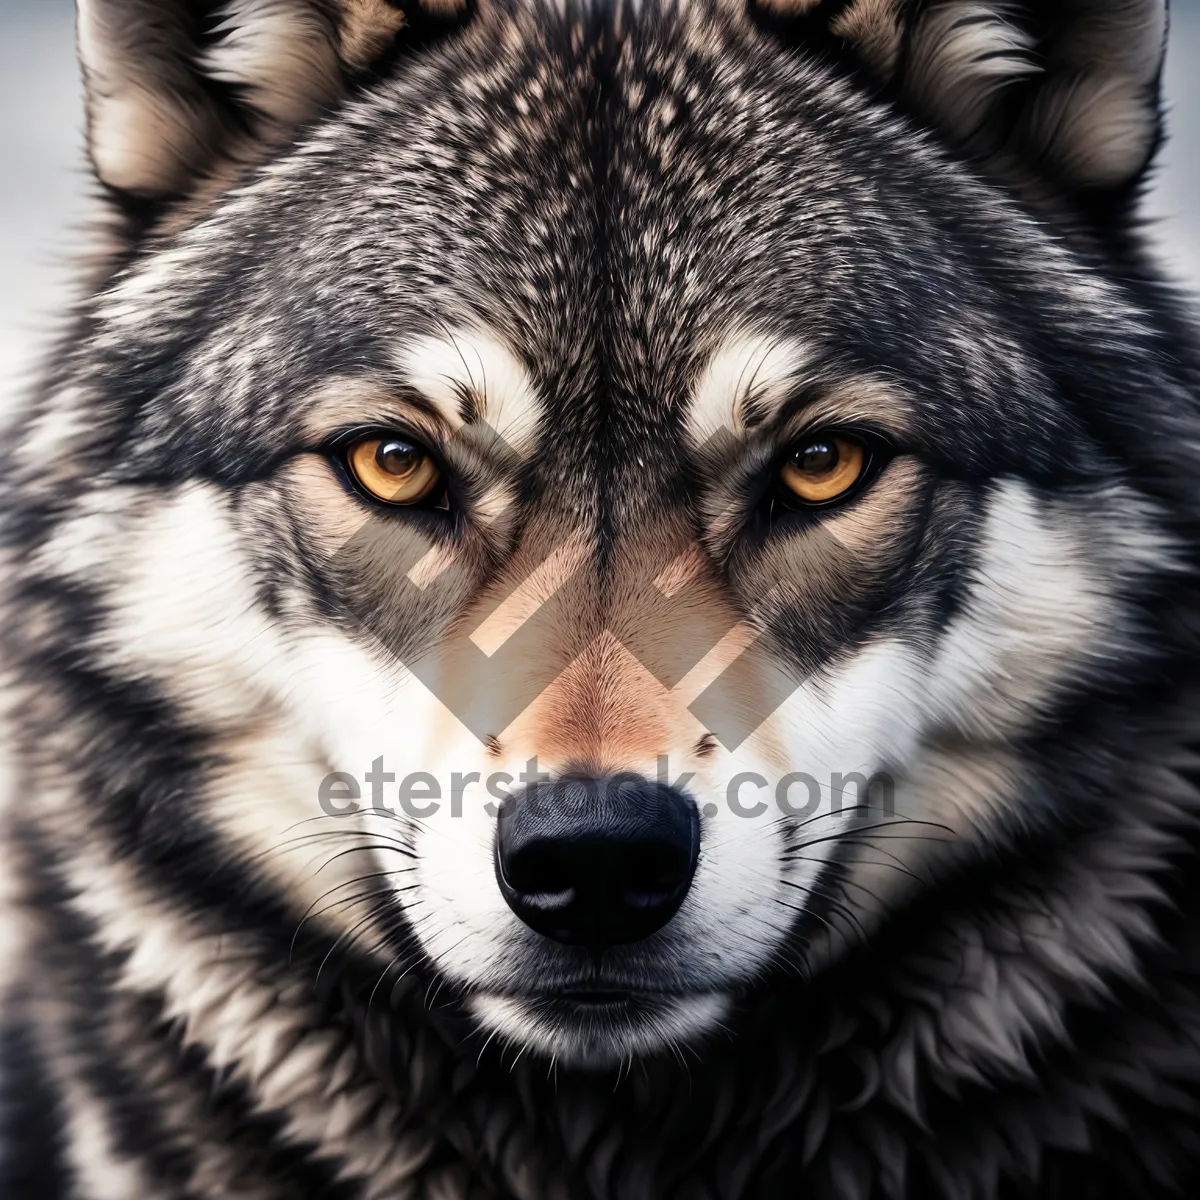 Picture of Majestic Timber Wolf: Wild Canine with Piercing Gaze